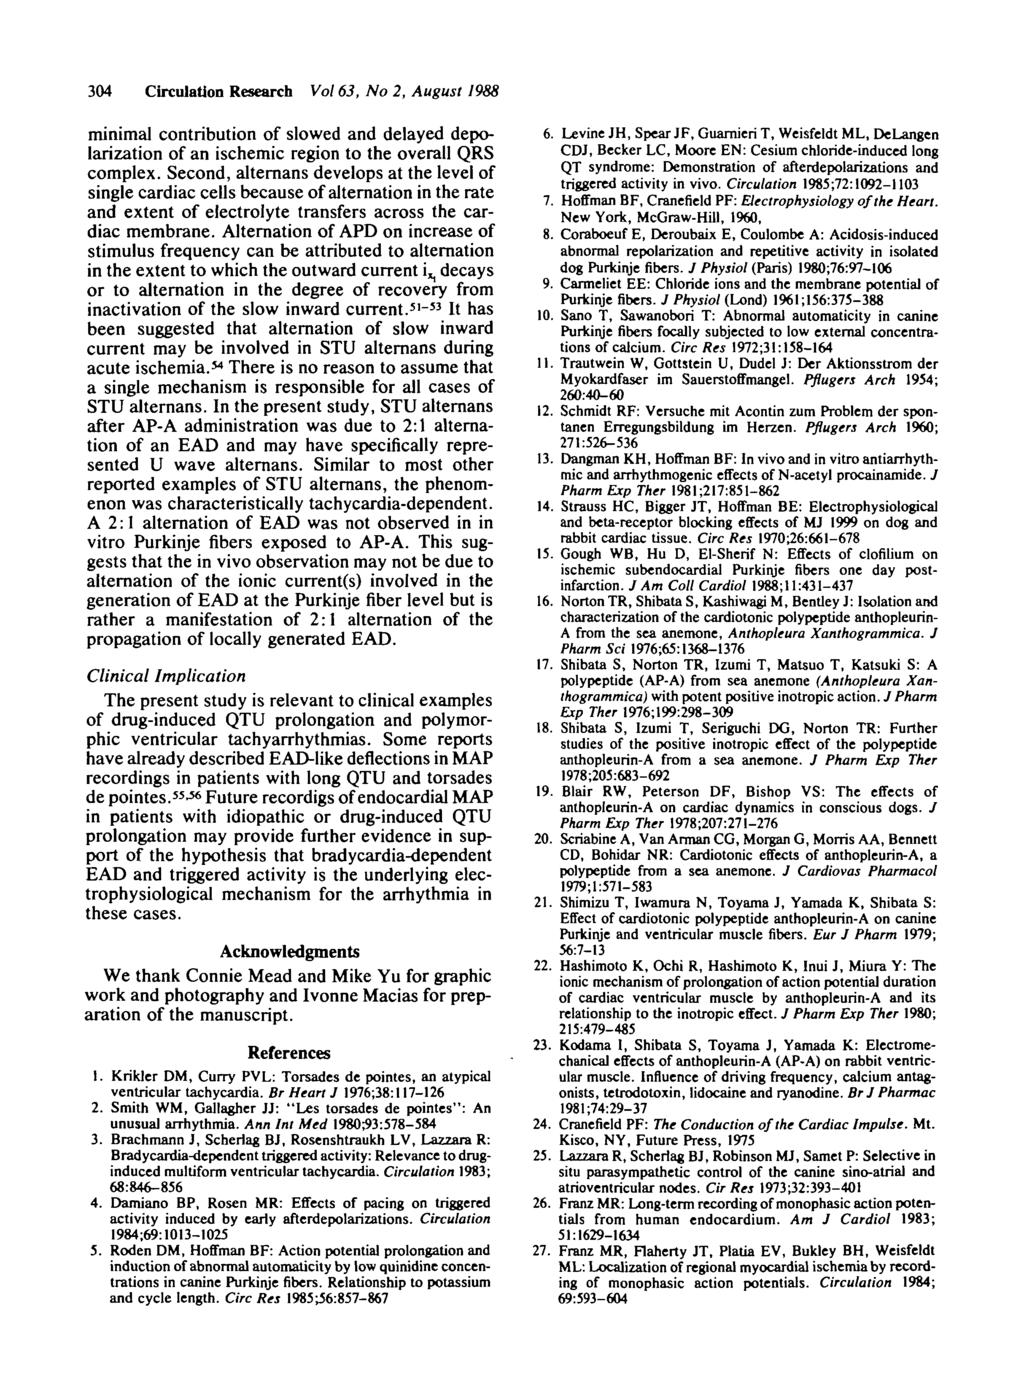 304 Circulation Research Vol 63, No 2, August 1988 minimal contribution of slowed and delayed depolarization of an ischemic region to the overall QRS complex.